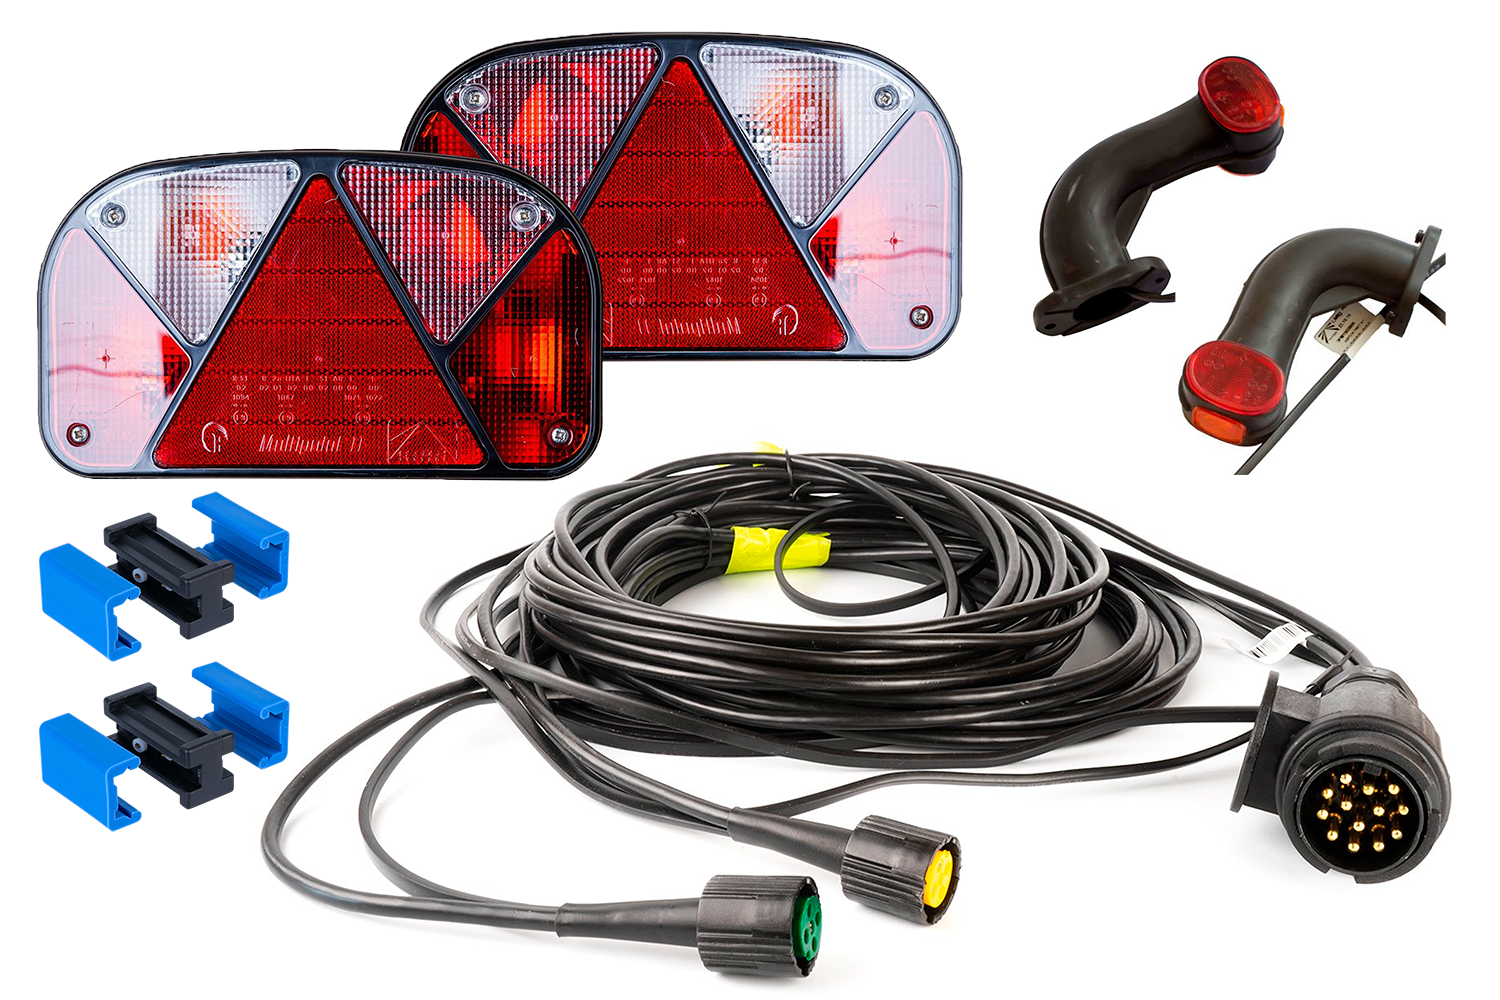 Set: Aspöck Multipoint II rear lights, Superpoint II side marker lights  with 7m 13-pin harness and quick splice couplers - UNITRAILER